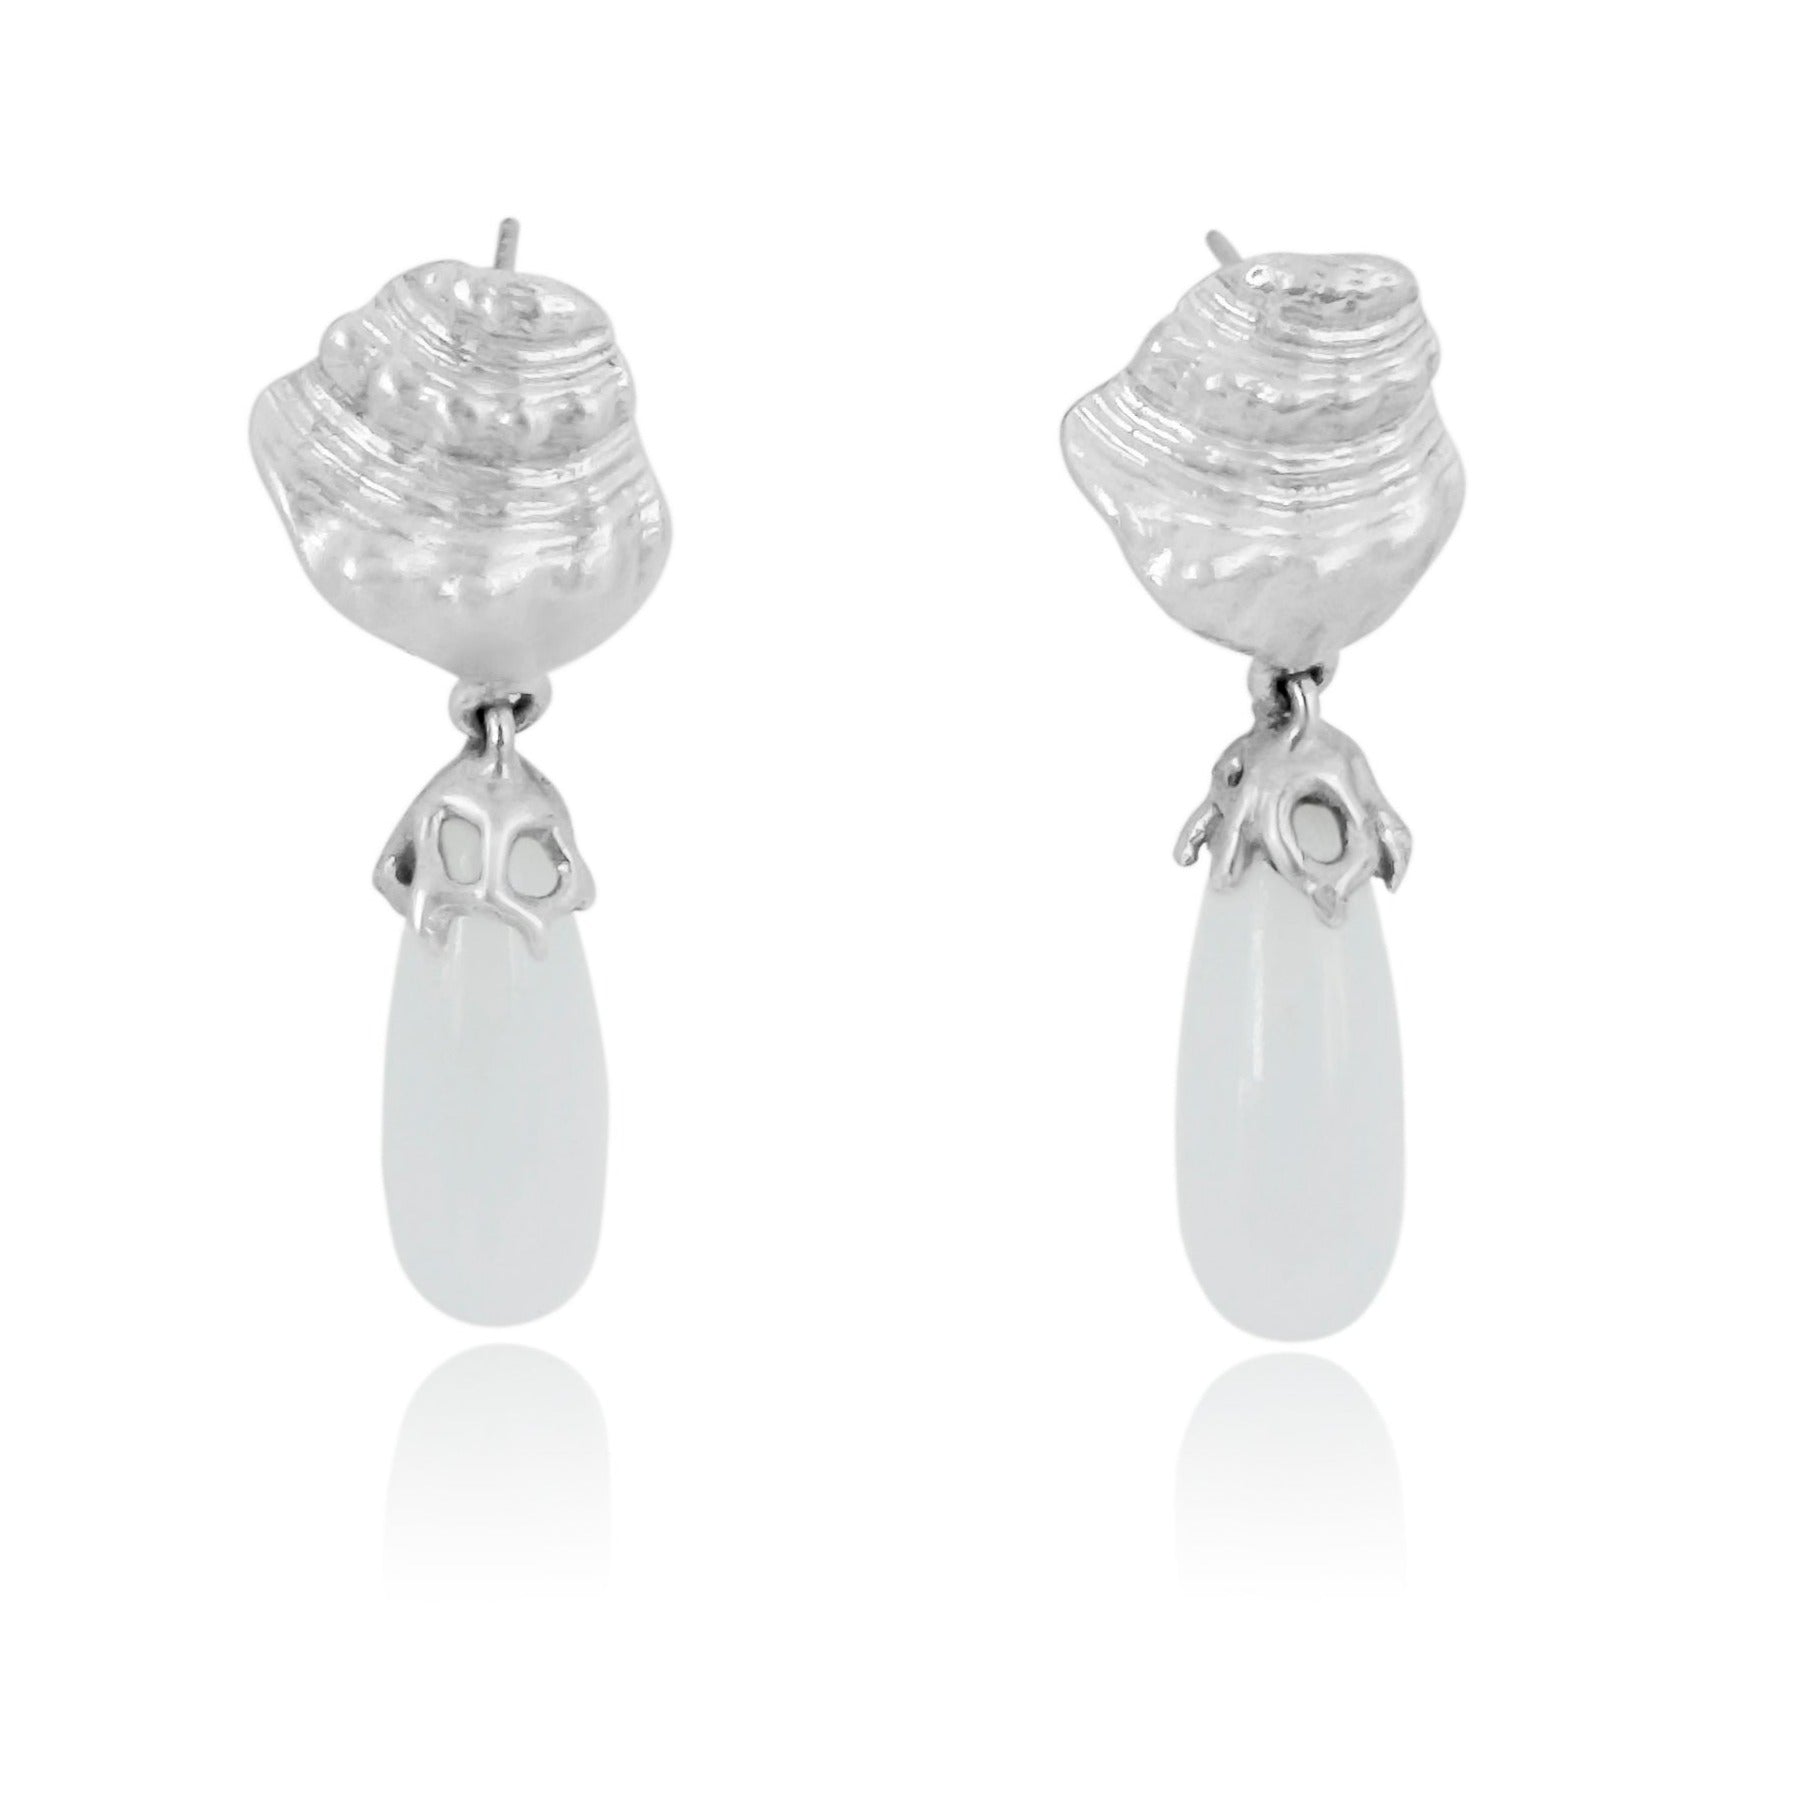 Unearthed- Sea whisper moonstone earrings with a broken seashell